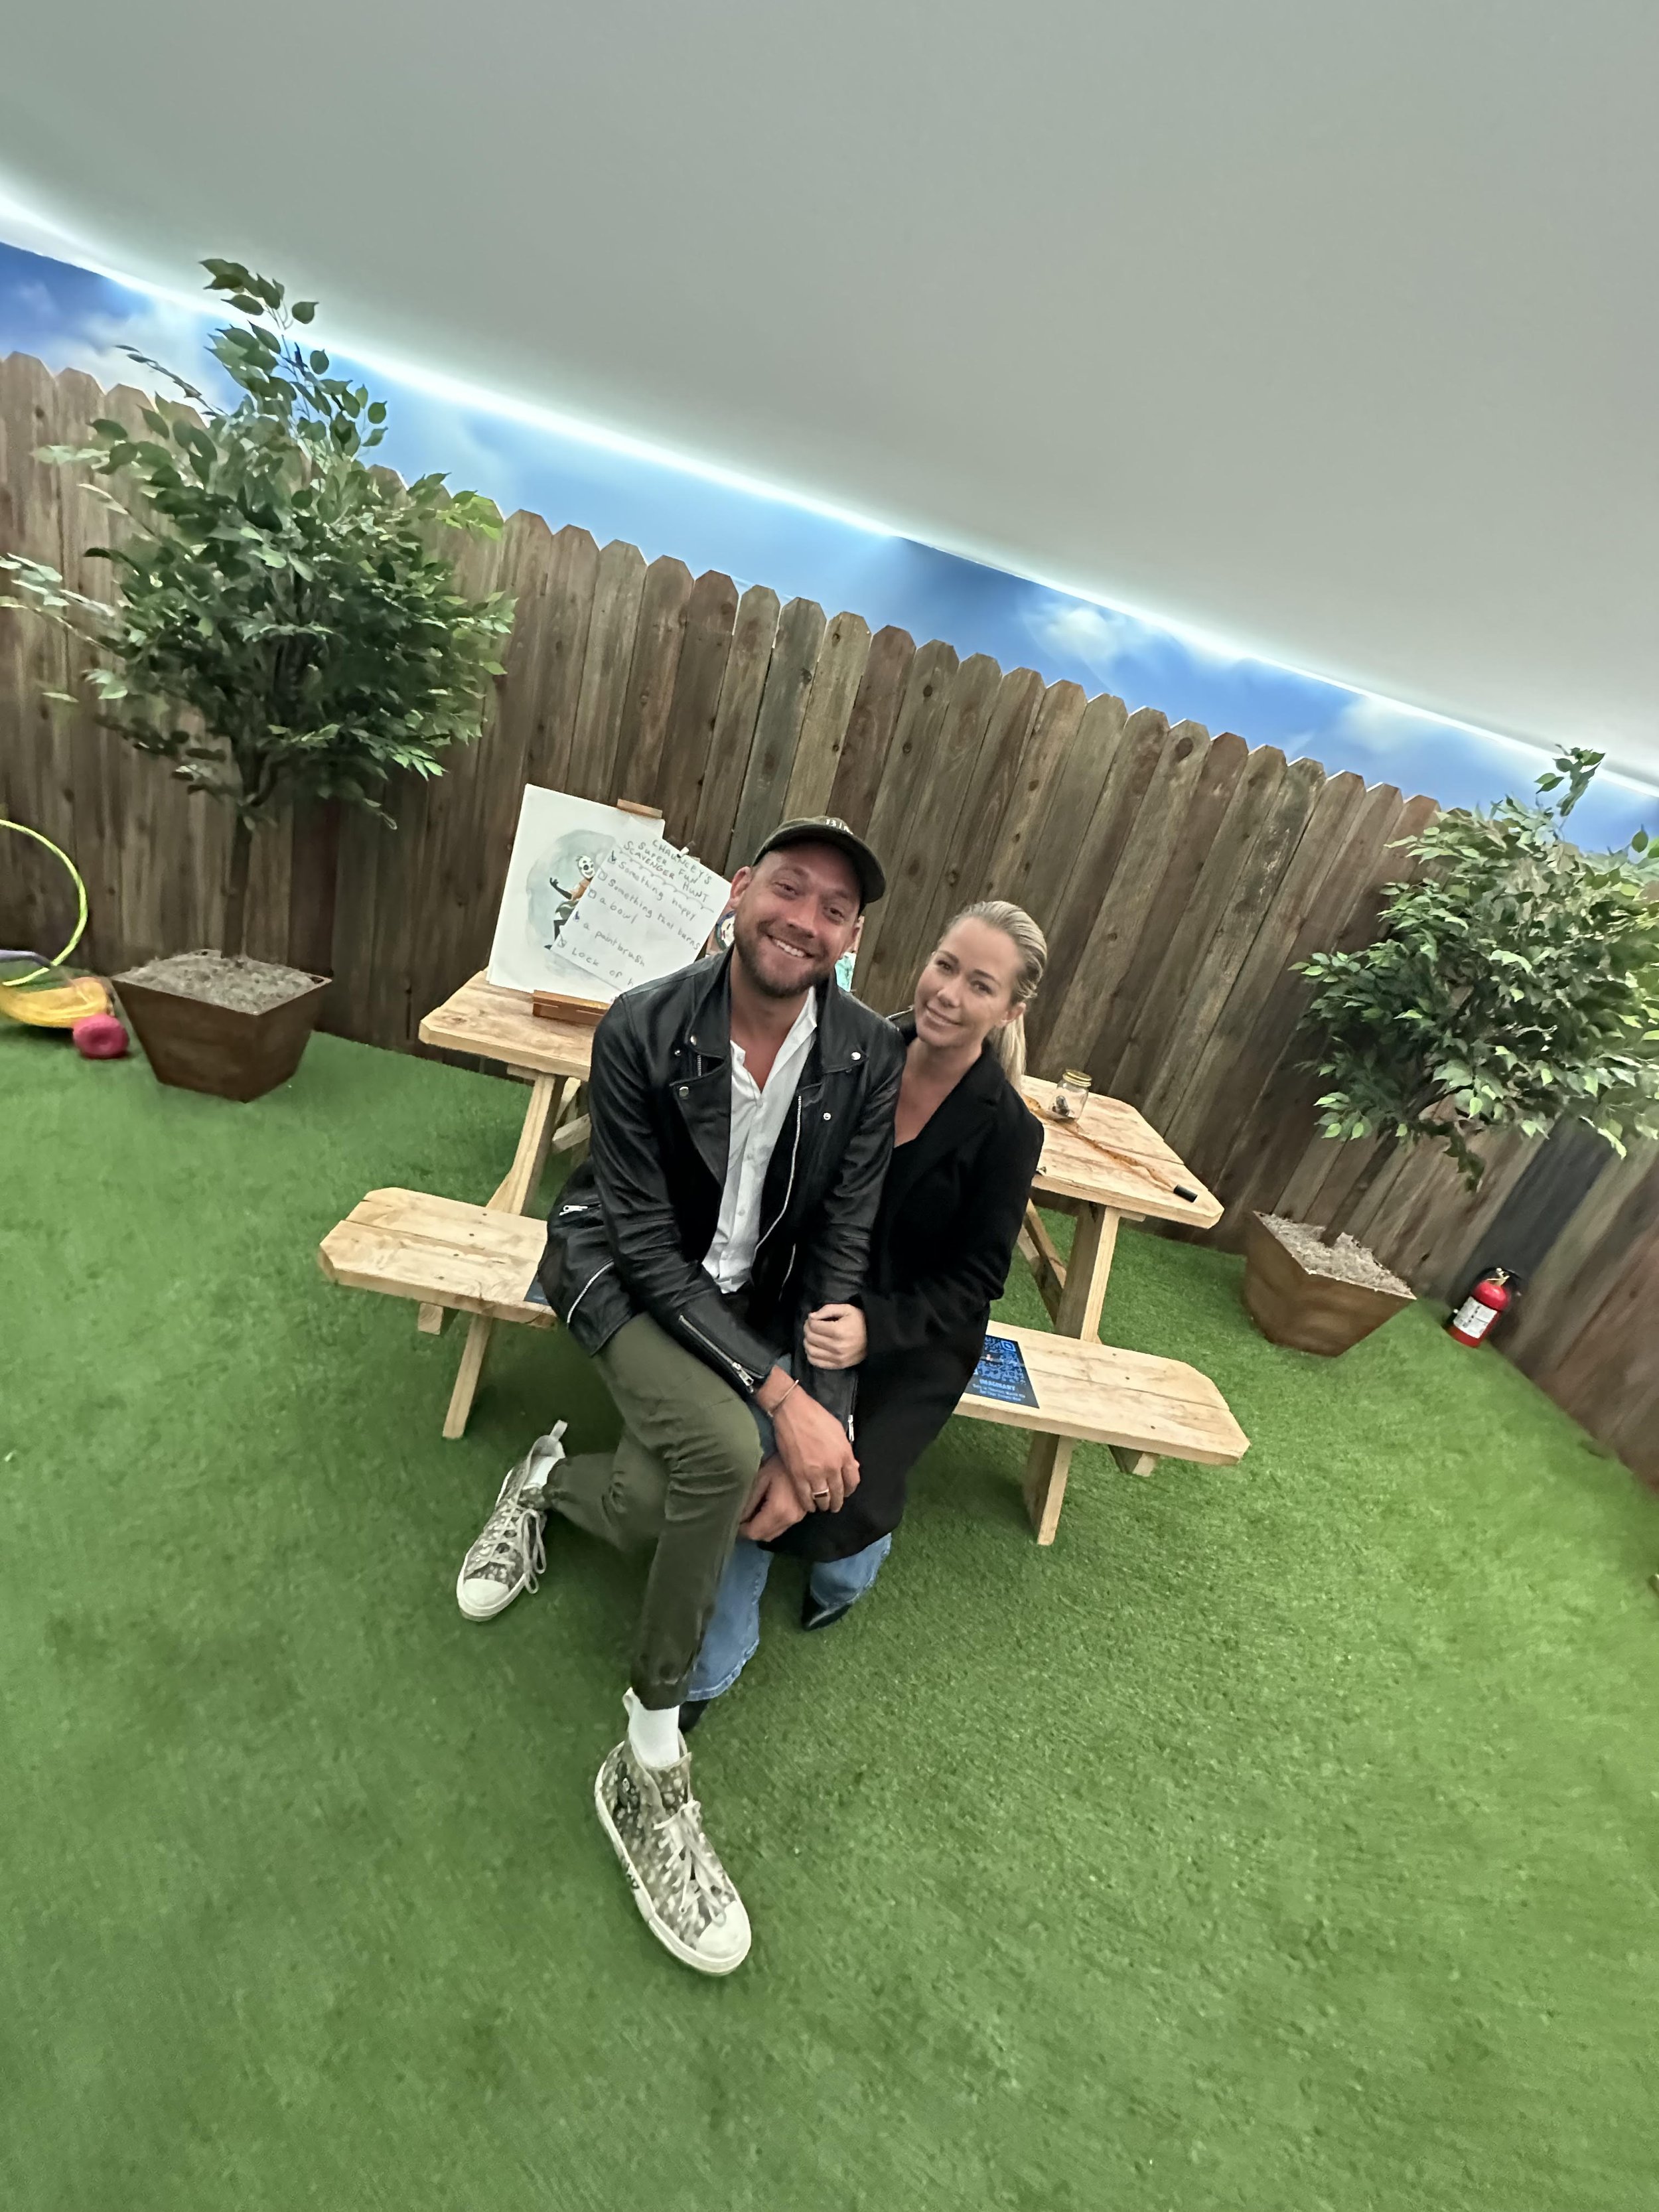  Kendra Wilkinson and publicist Shae Savin were wowed by the incredible production and experience while attending  Lionsgate x Blumhouse presenting Chauncey’s “Imaginary Playhouse” produced by Experiential Supply Co. in Los Angeles.&nbsp; The film  &